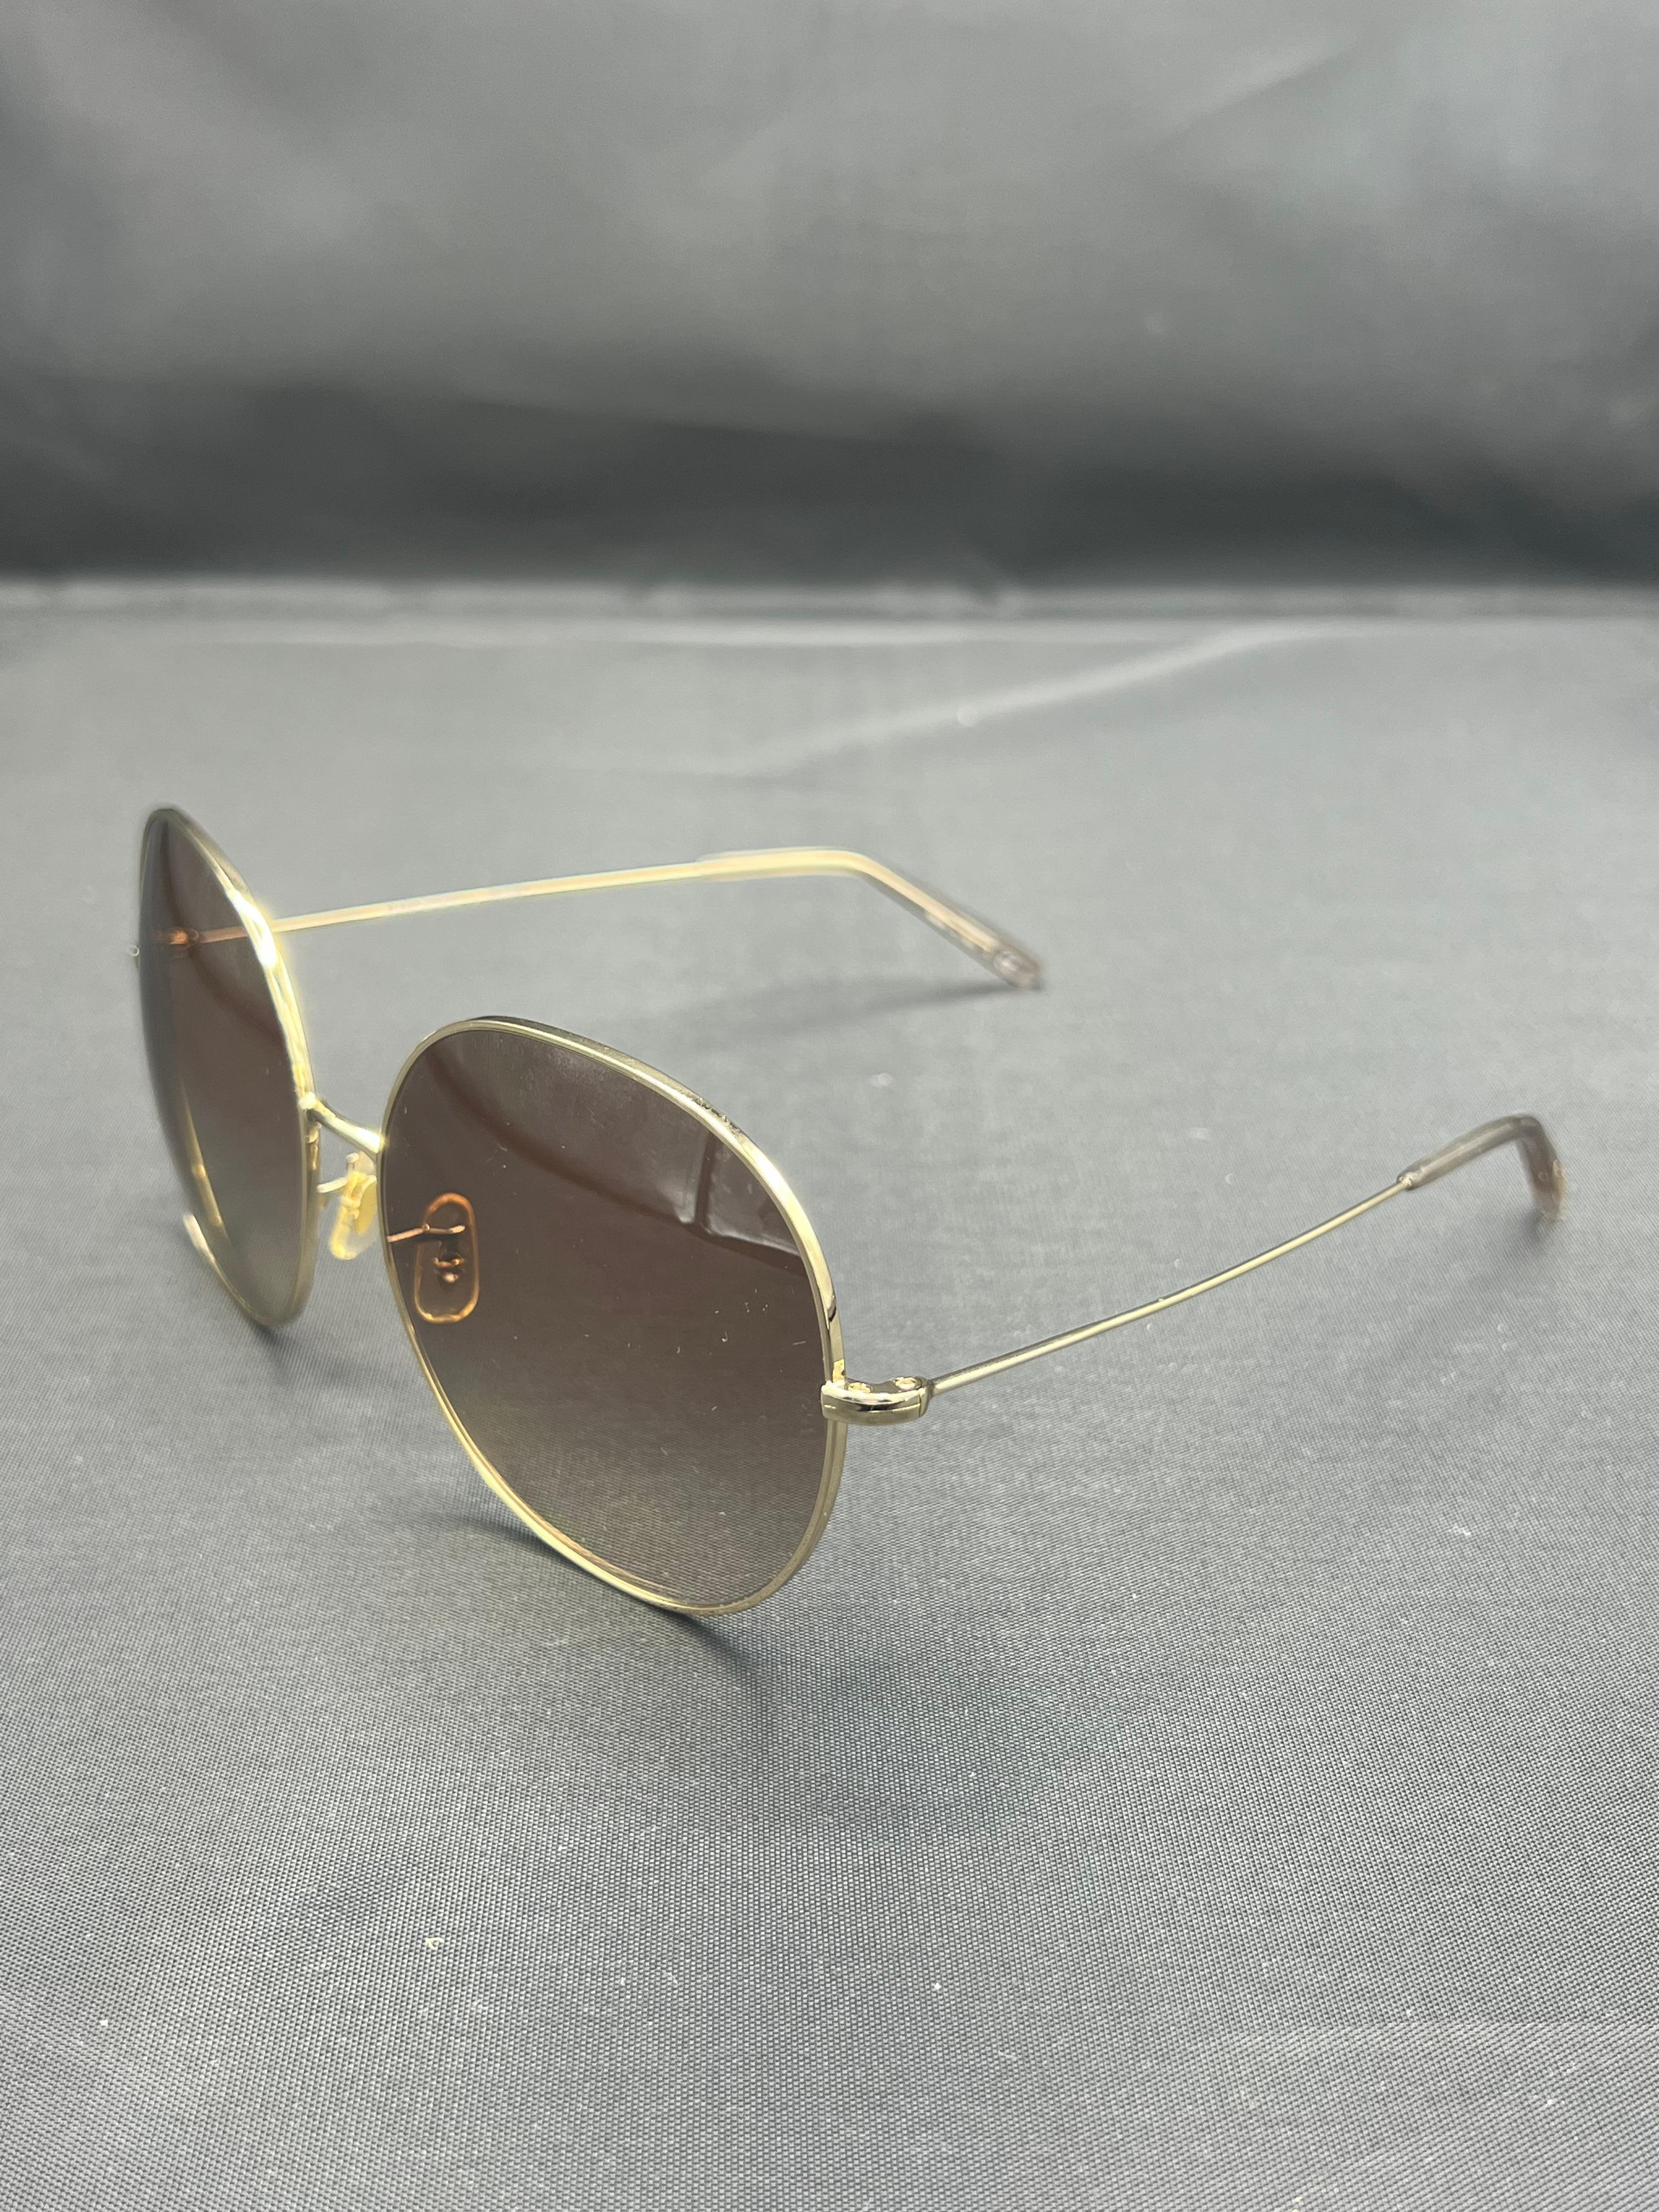 - Gold tone hardware
- Brown gradient lenses
- Round shape
- Comes with the original case
- Made in Italy